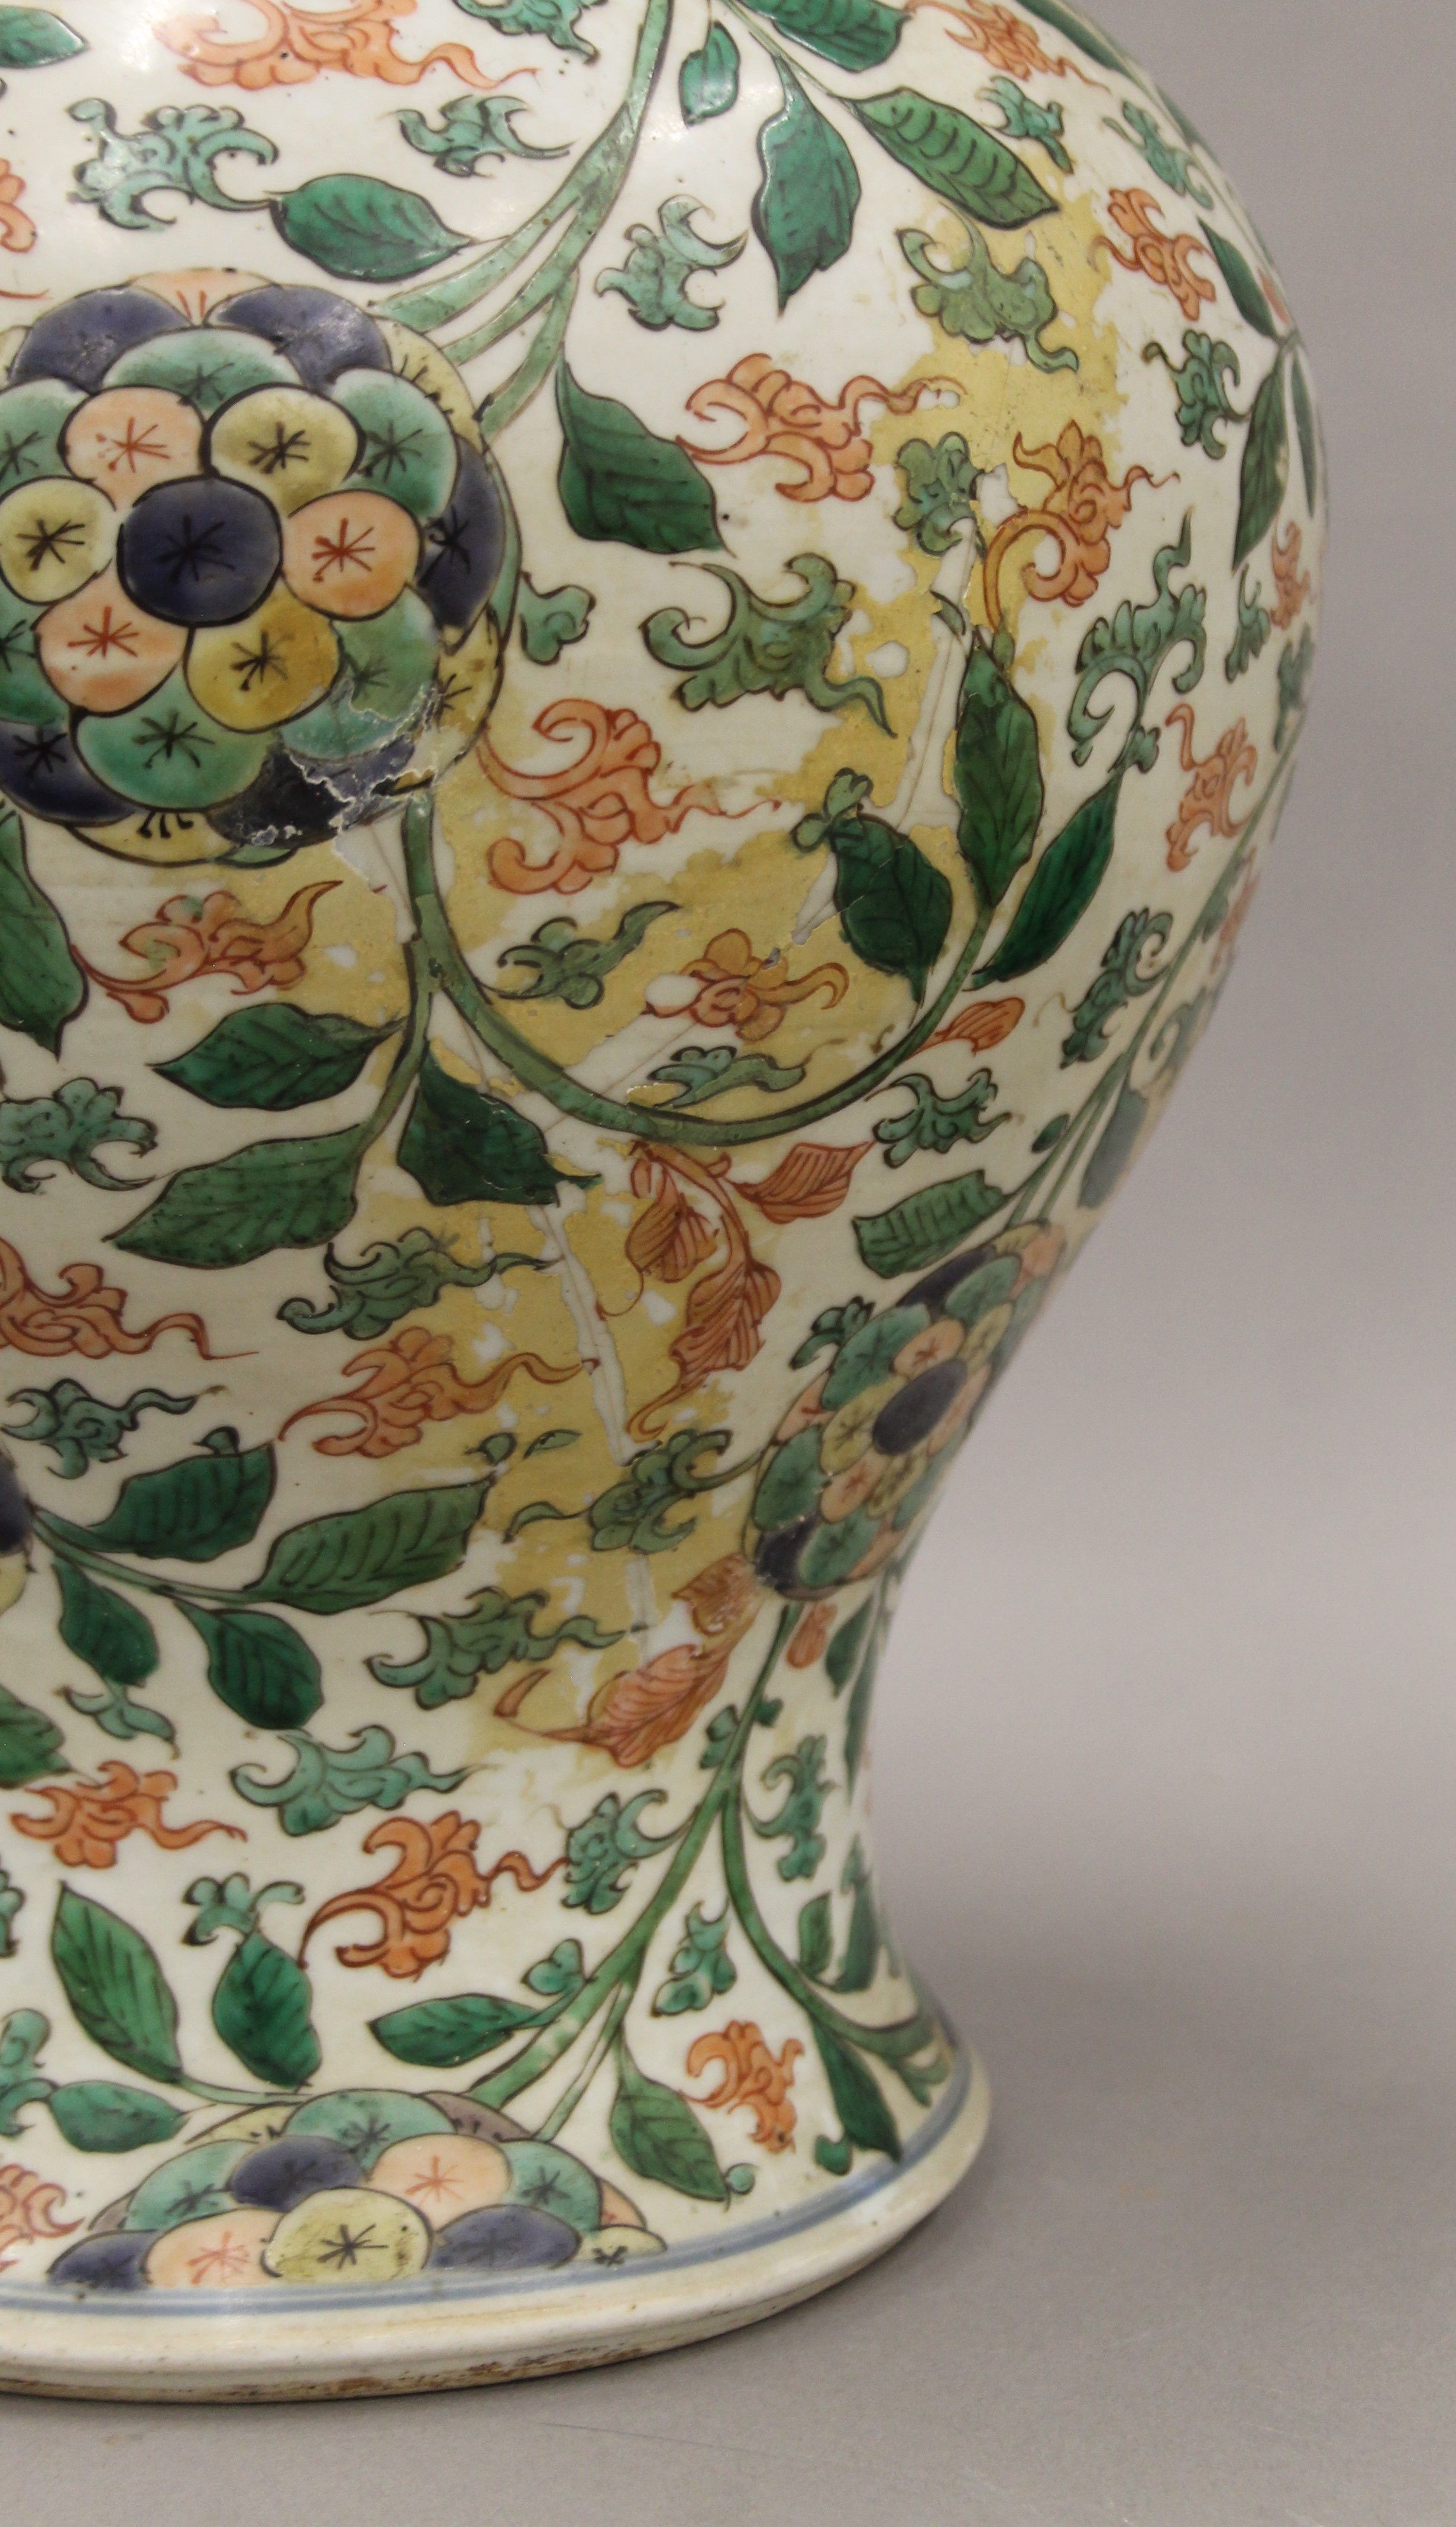 A 18th/19th century Chinese porcelain vase with pierced wooden lid and carved wooden stand. - Image 5 of 8